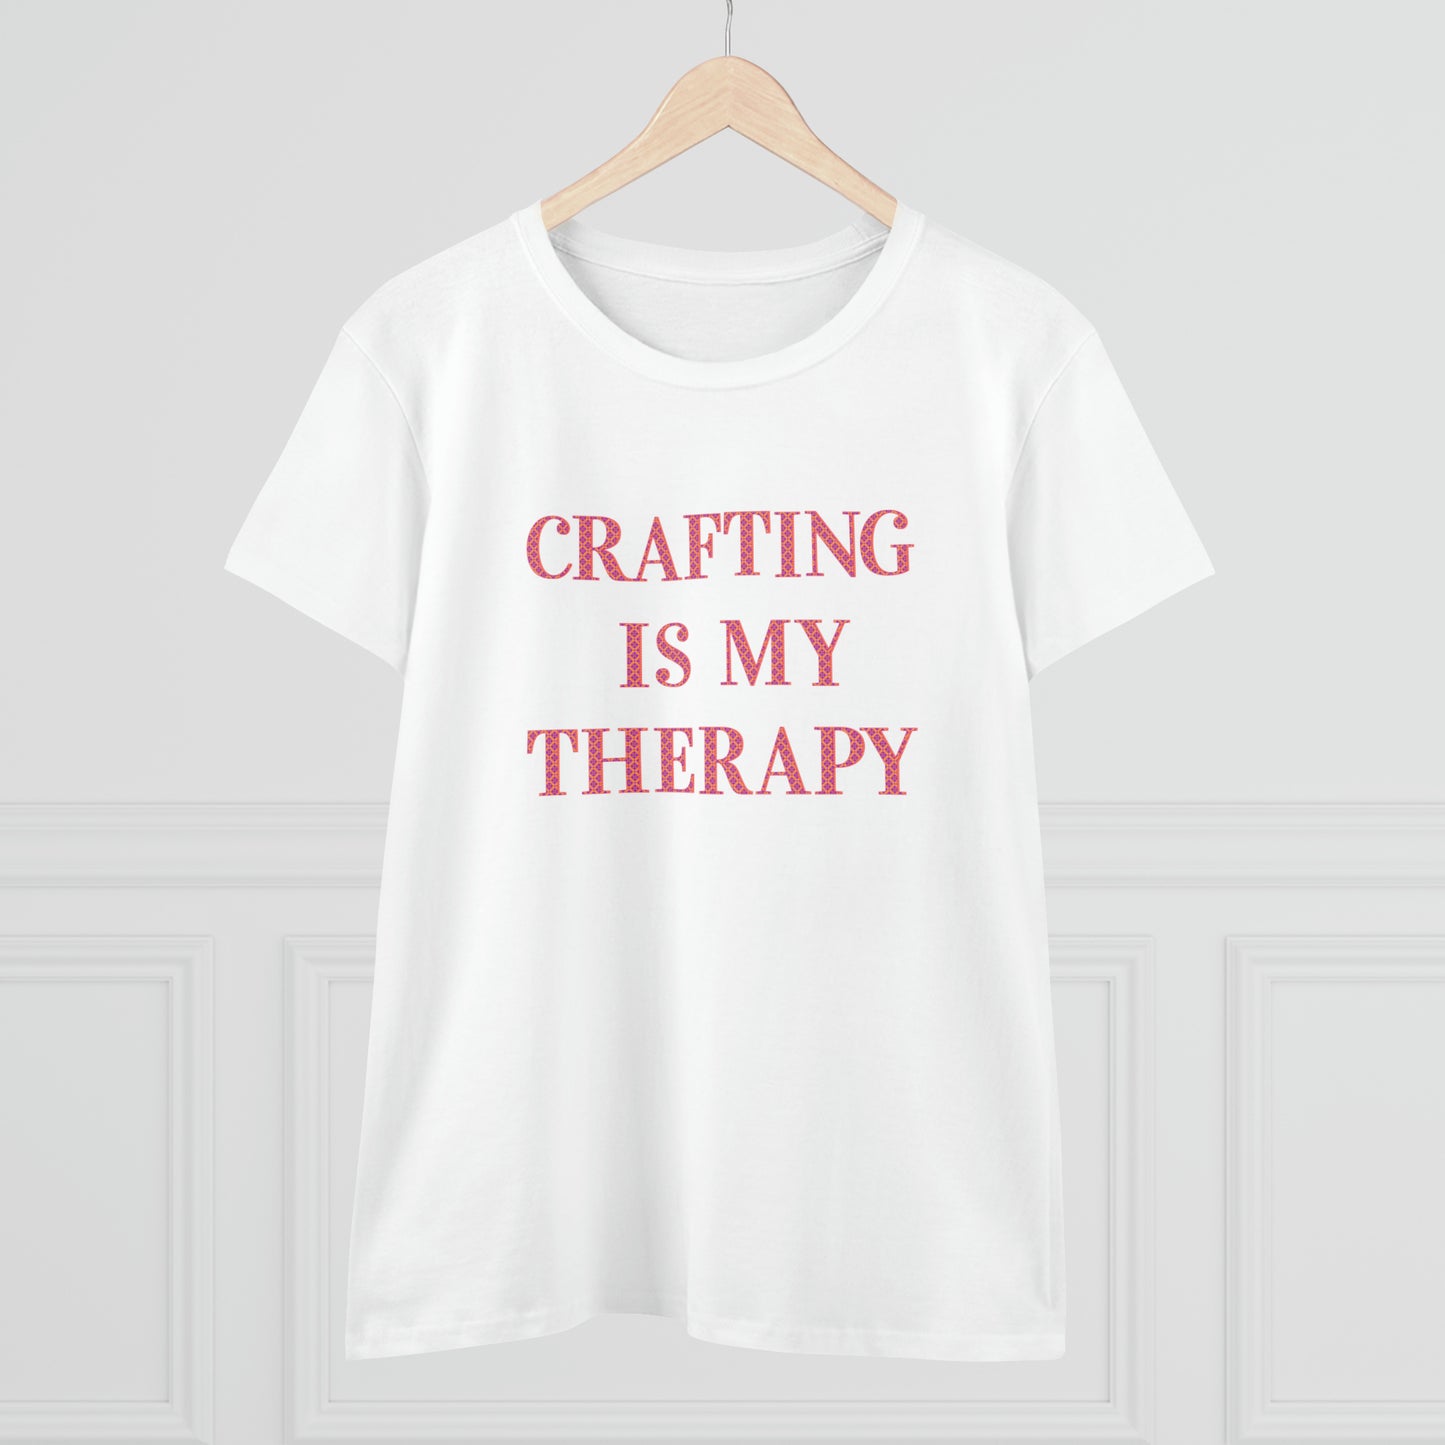 Crafting Is My Therapy- Adult, Semi-fitted, T-shirt